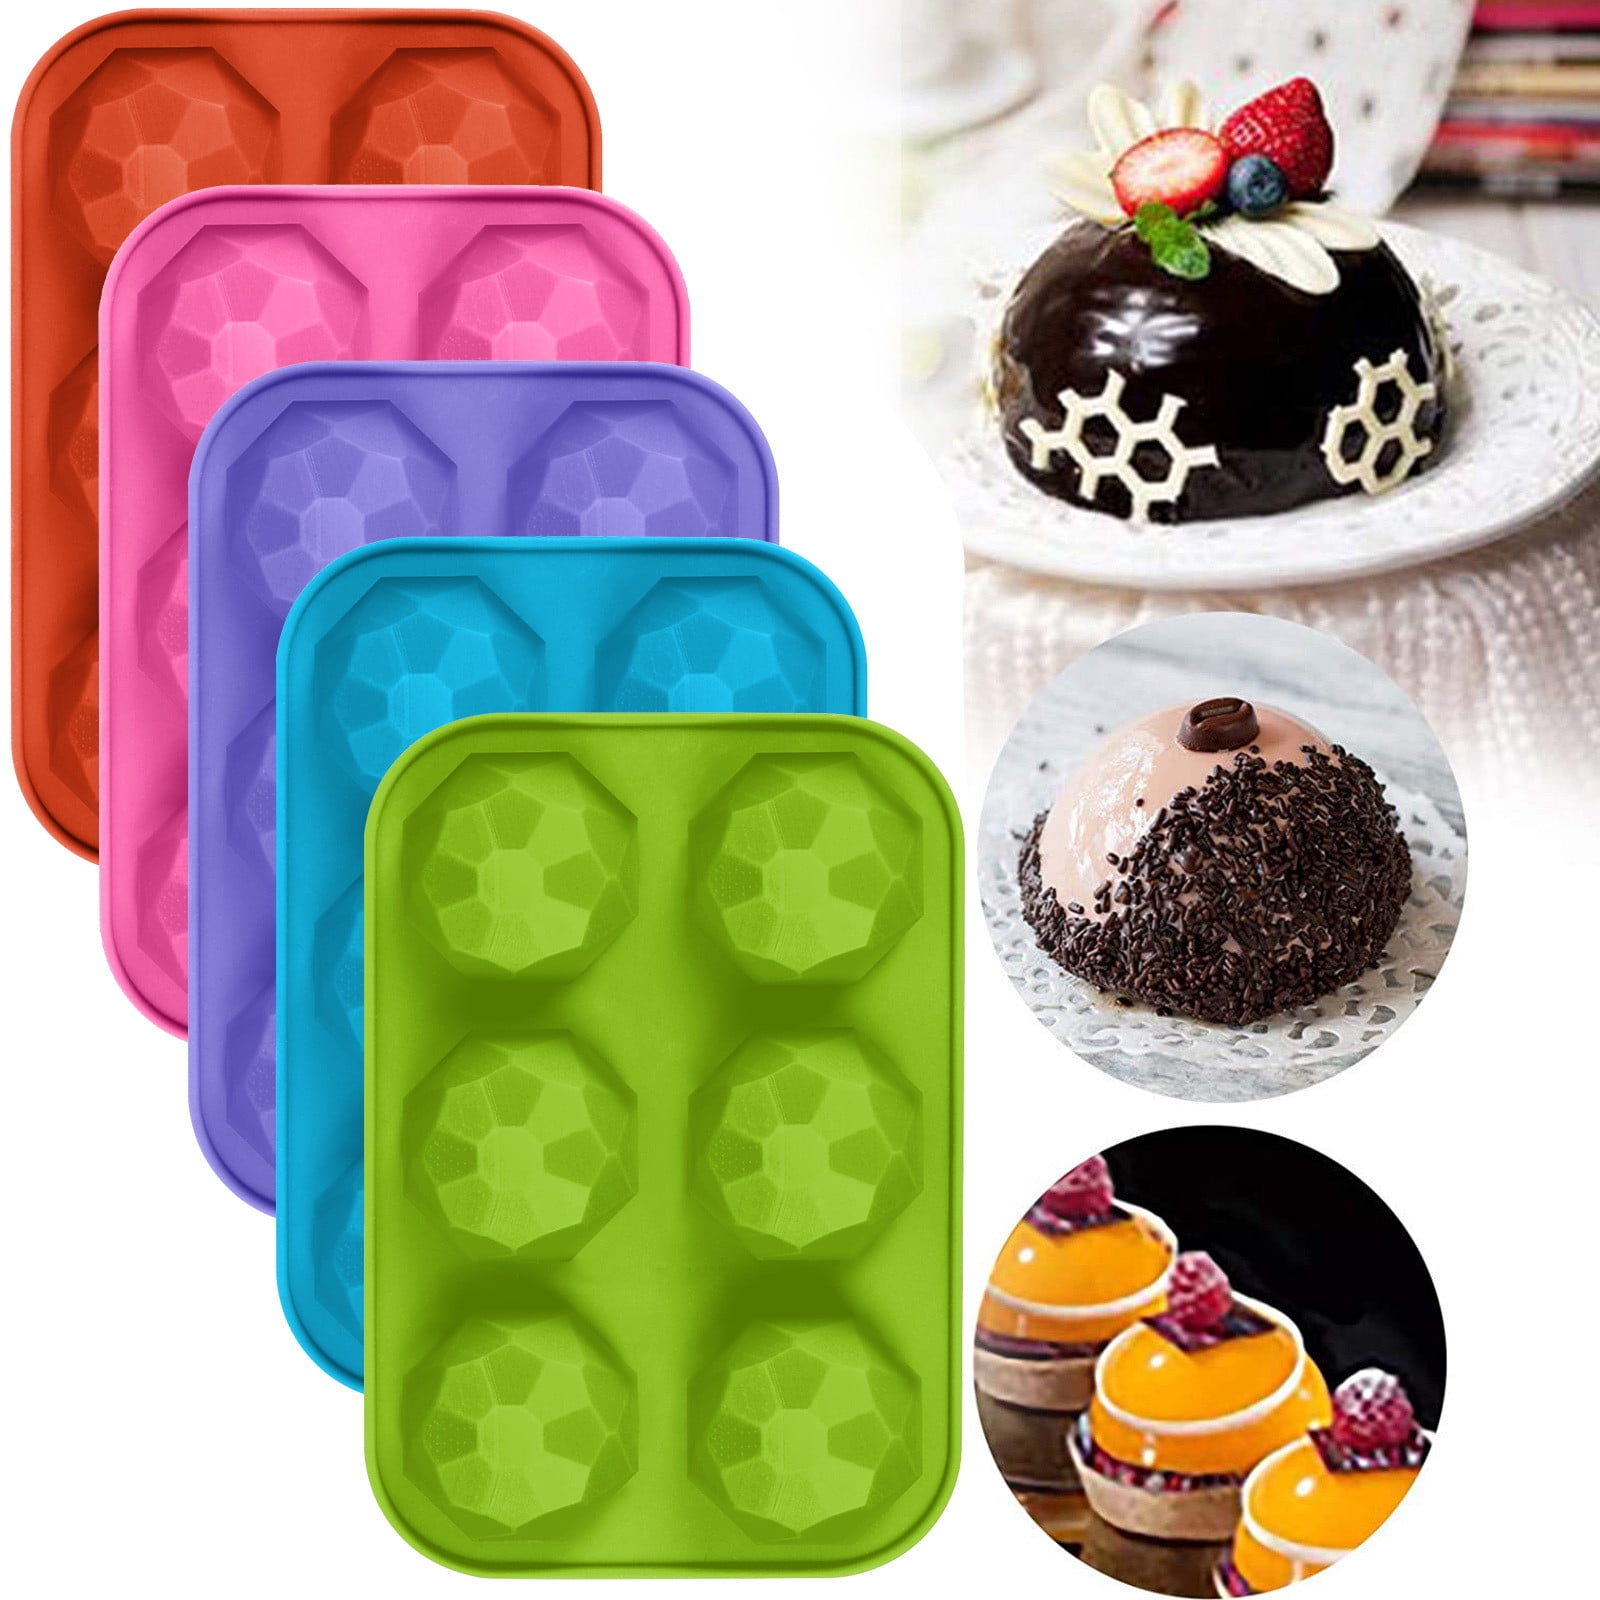 Grenade Cake Decorating Silicone Chocolate Baking Craft Mold Tool Ice Mould